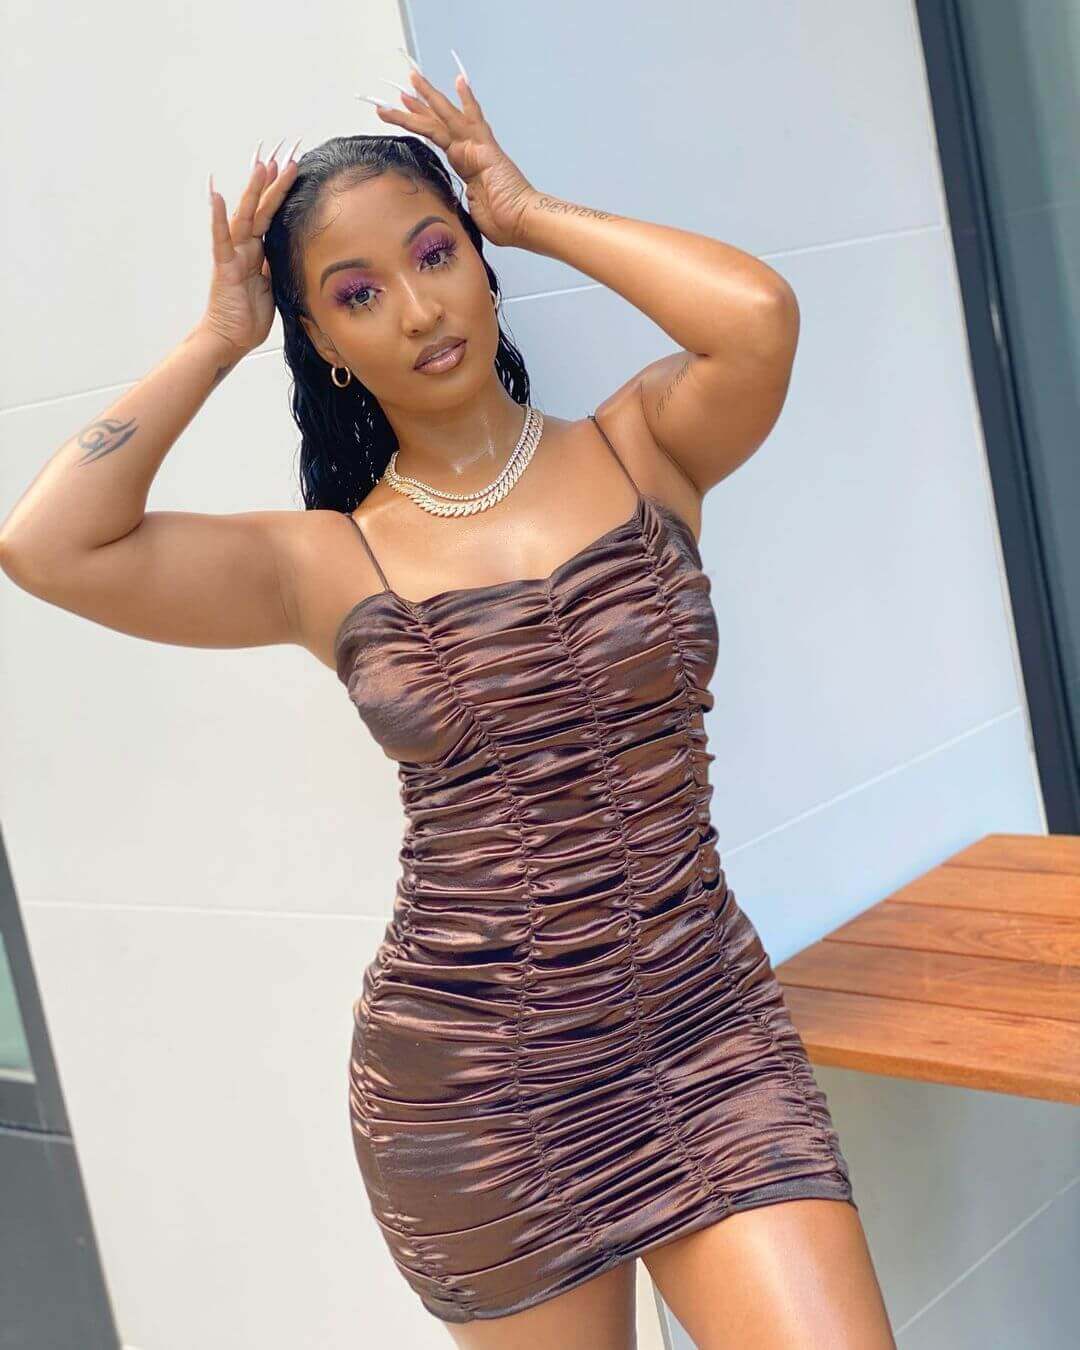 Shenseea Biography Age, Husband, Siblings, Net Worth & Pictures 360dopes